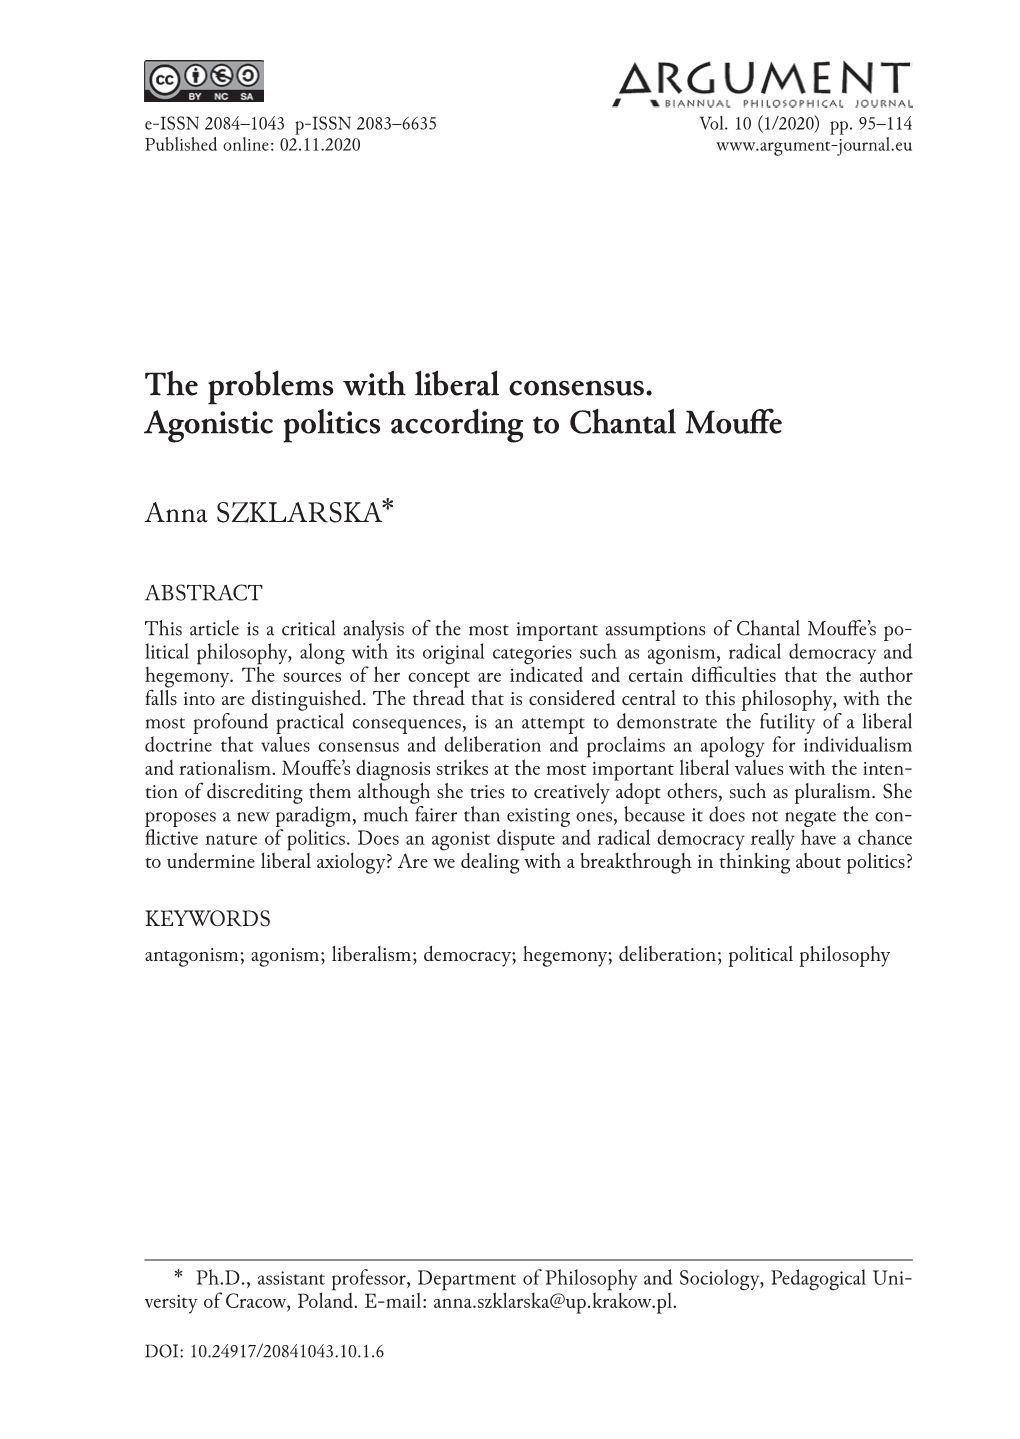 The Problems with Liberal Consensus. Agonistic Politics According to Chantal Mouffe